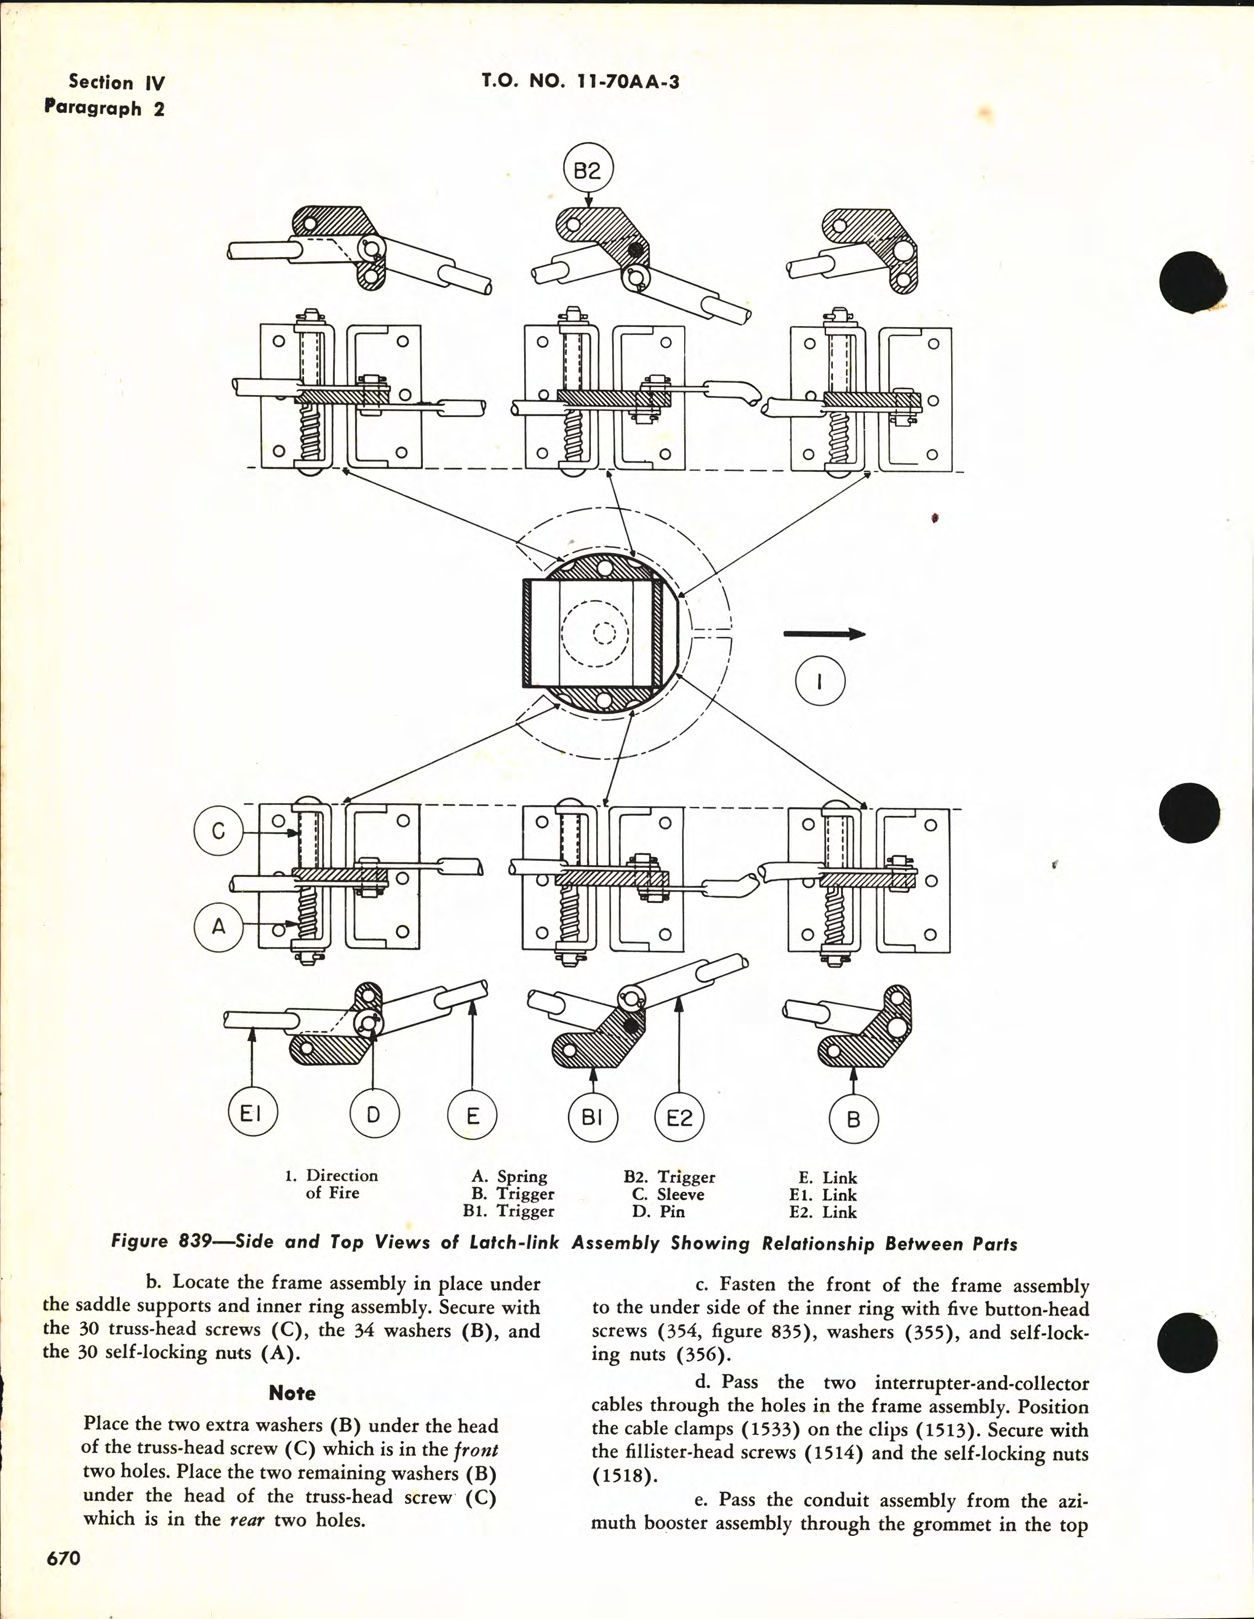 Sample page 8 from AirCorps Library document: Remote Control Turret Systems Models 2CFR55B1, B2, B4, C1, C2, D1, Y1, Y3, and Y4